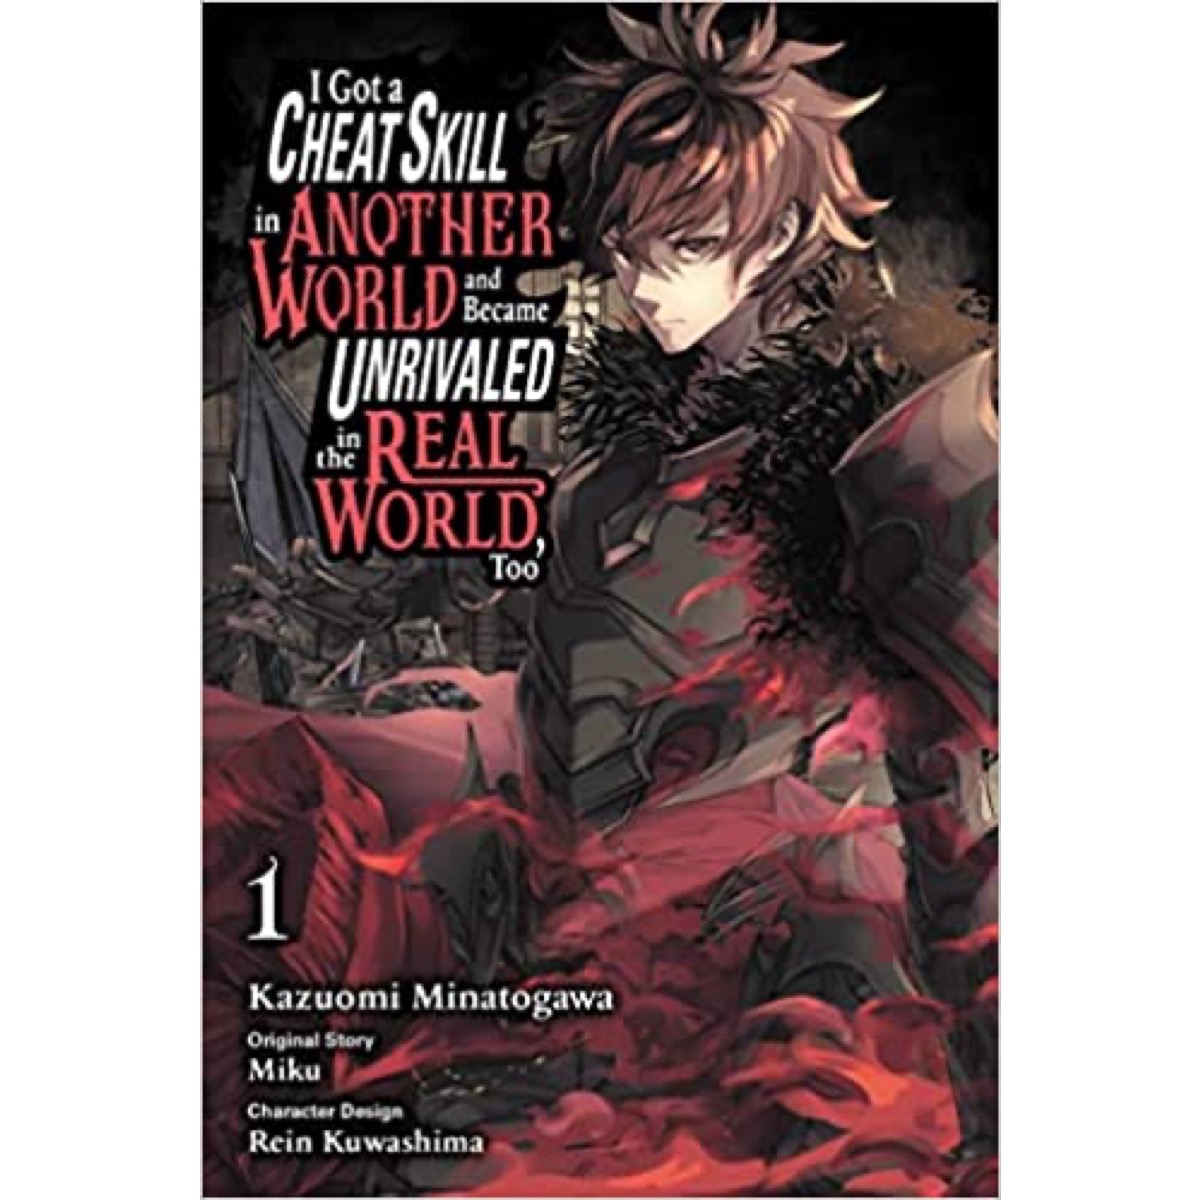  I Got a Cheat Skill in Another World and Became Unrivaled in  The Real World, Too, Vol. 1 (light novel) (I Got a Cheat Skill in Another  World and  in